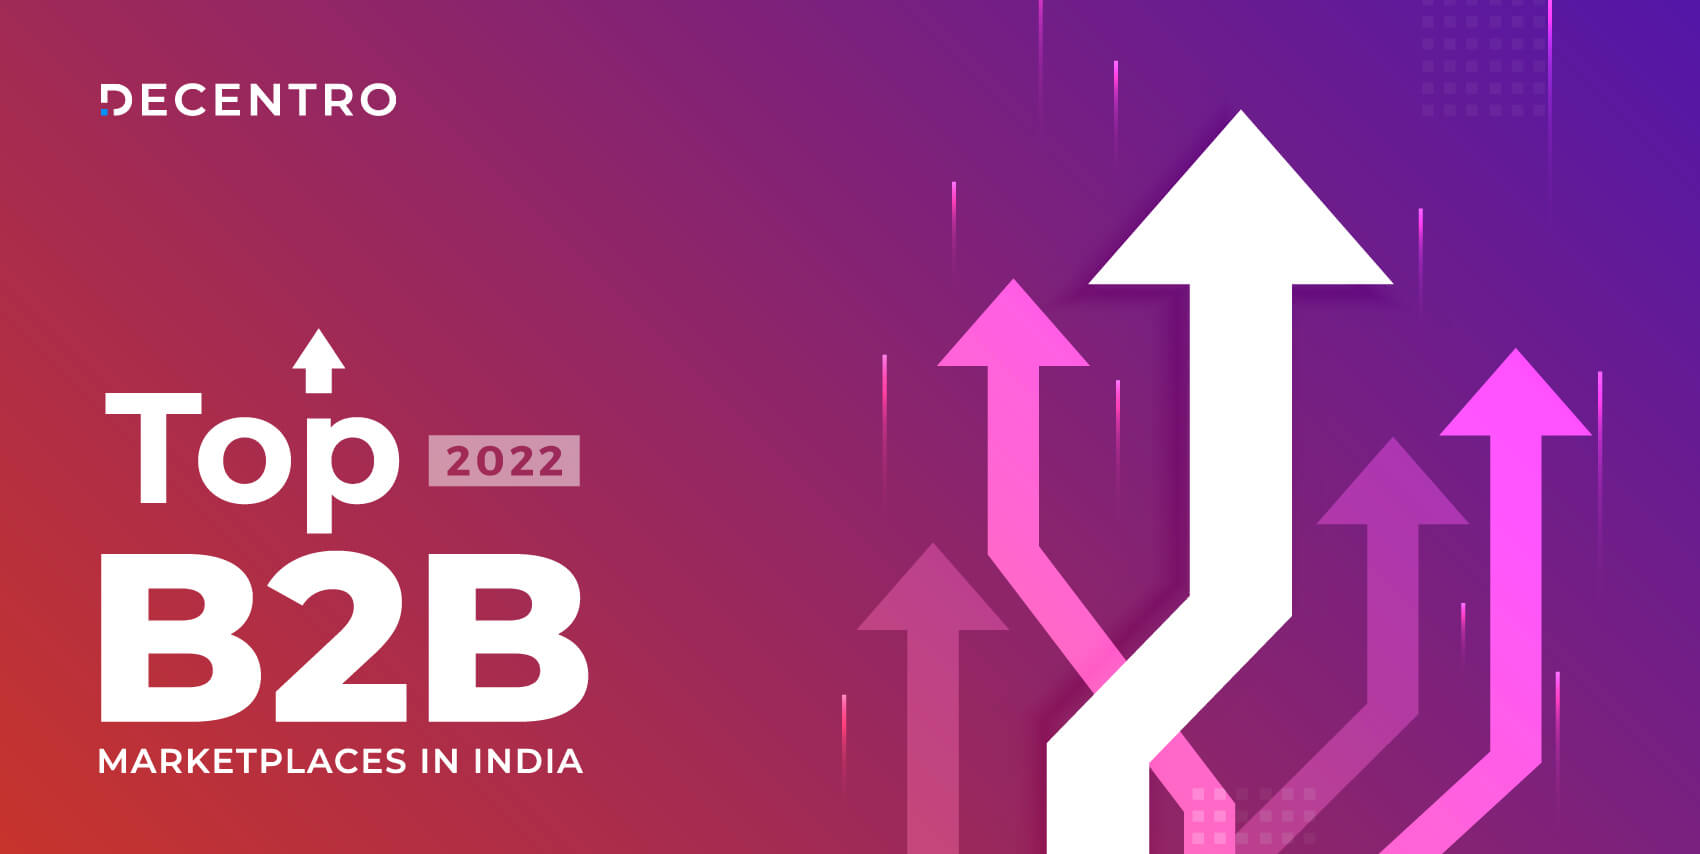 List of the top and upcoming B2B marketplaces in India for 2022.